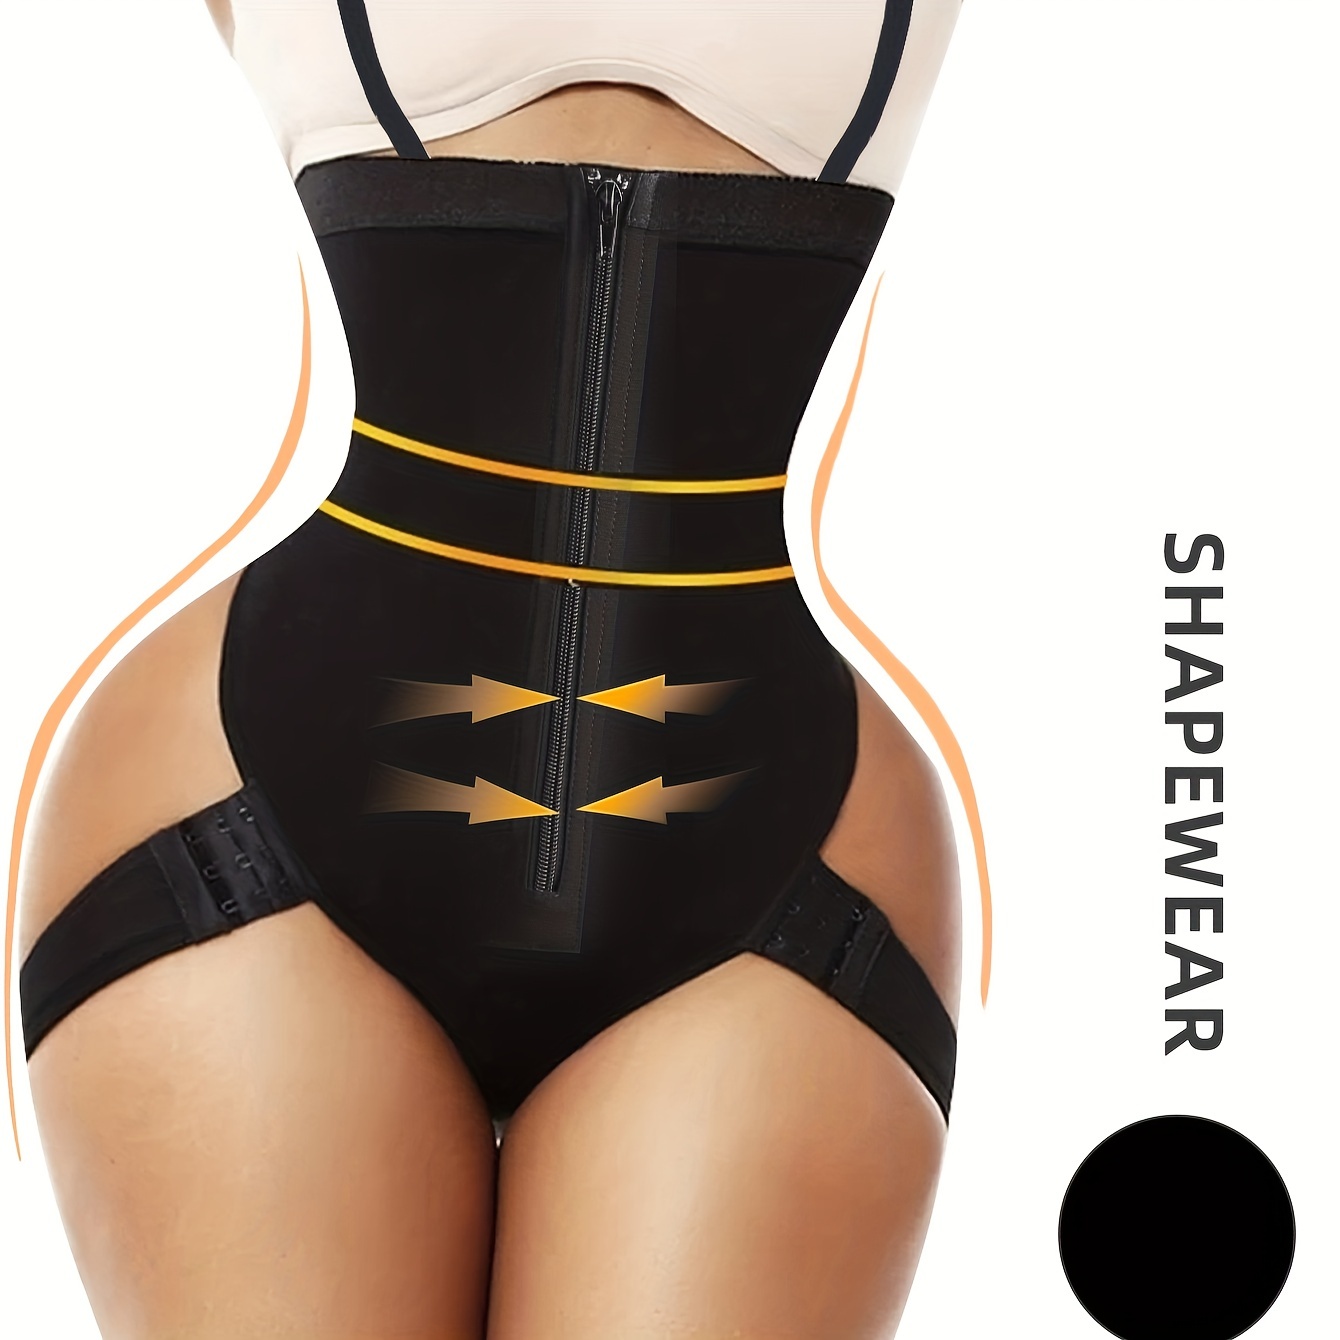 One-piece shapewear with zipper, lace and hip lift pants